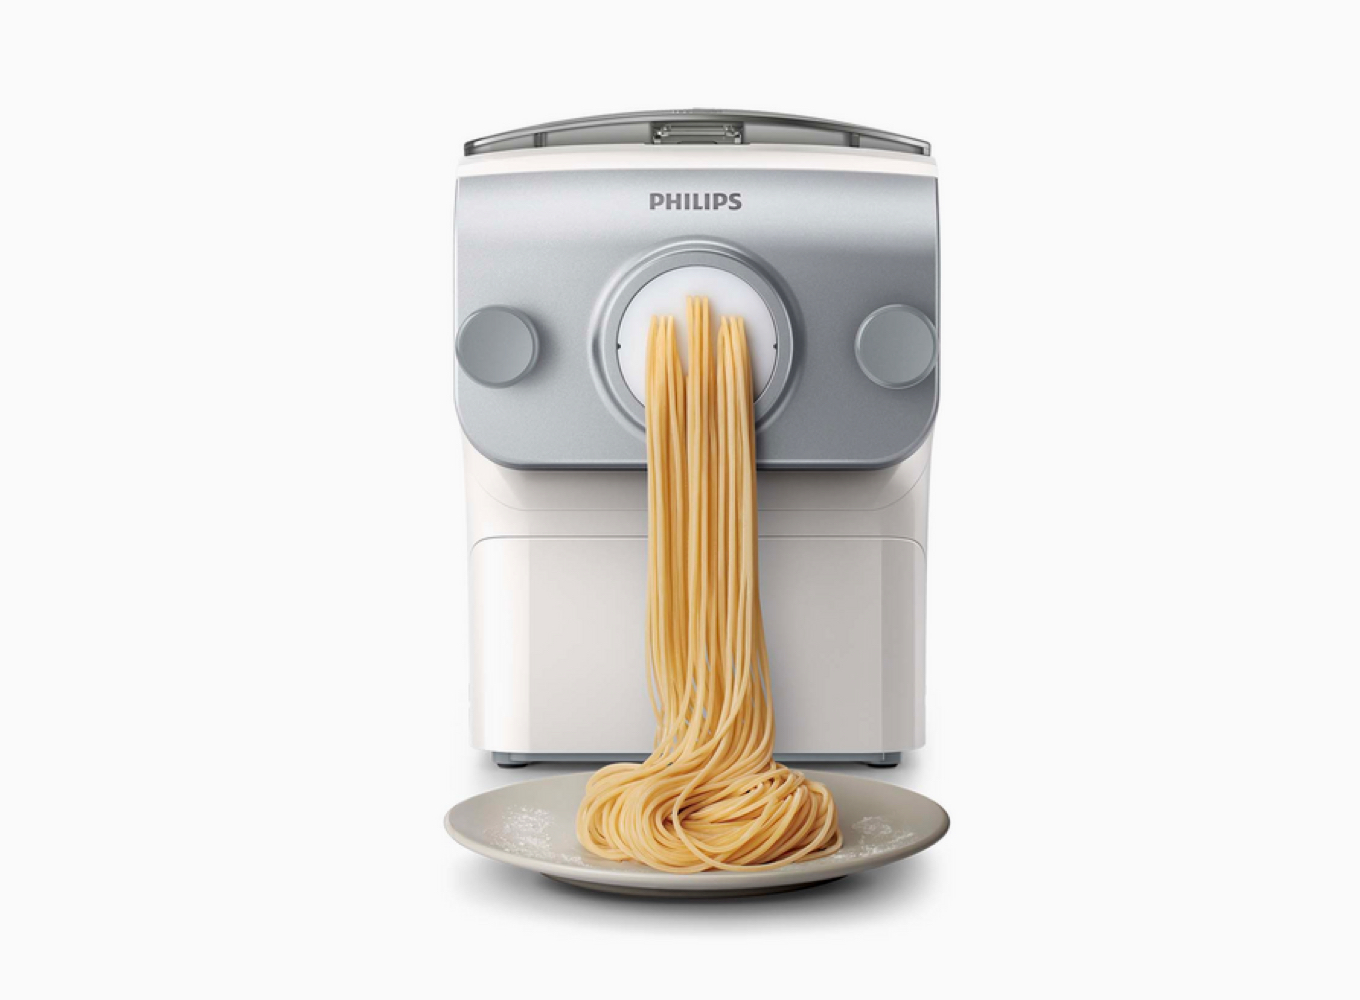 PASTA AND NOODLE MAKER